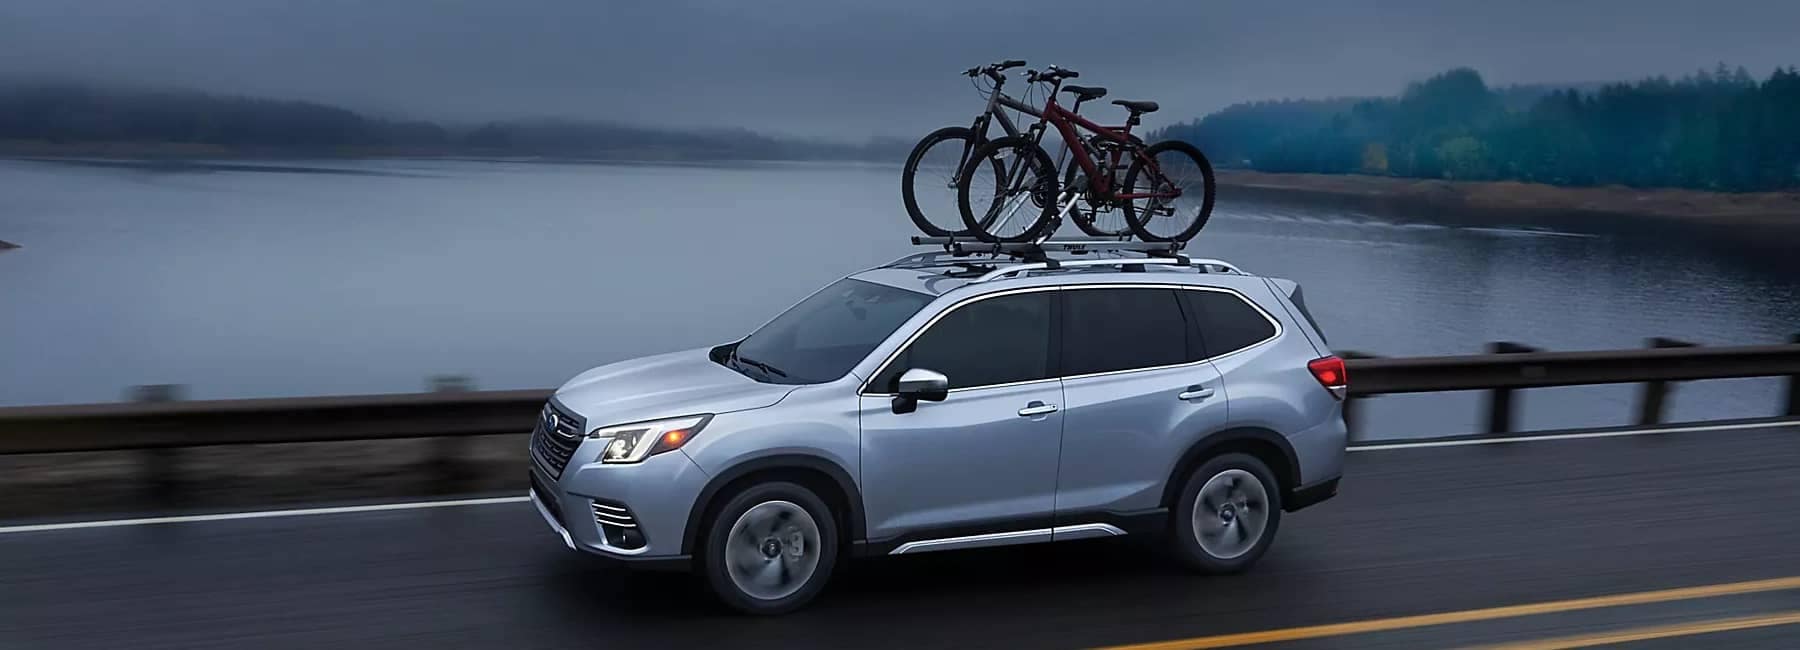 2022 Forester-sideview-cloudy day by dam_lake w_ kayaks-silver